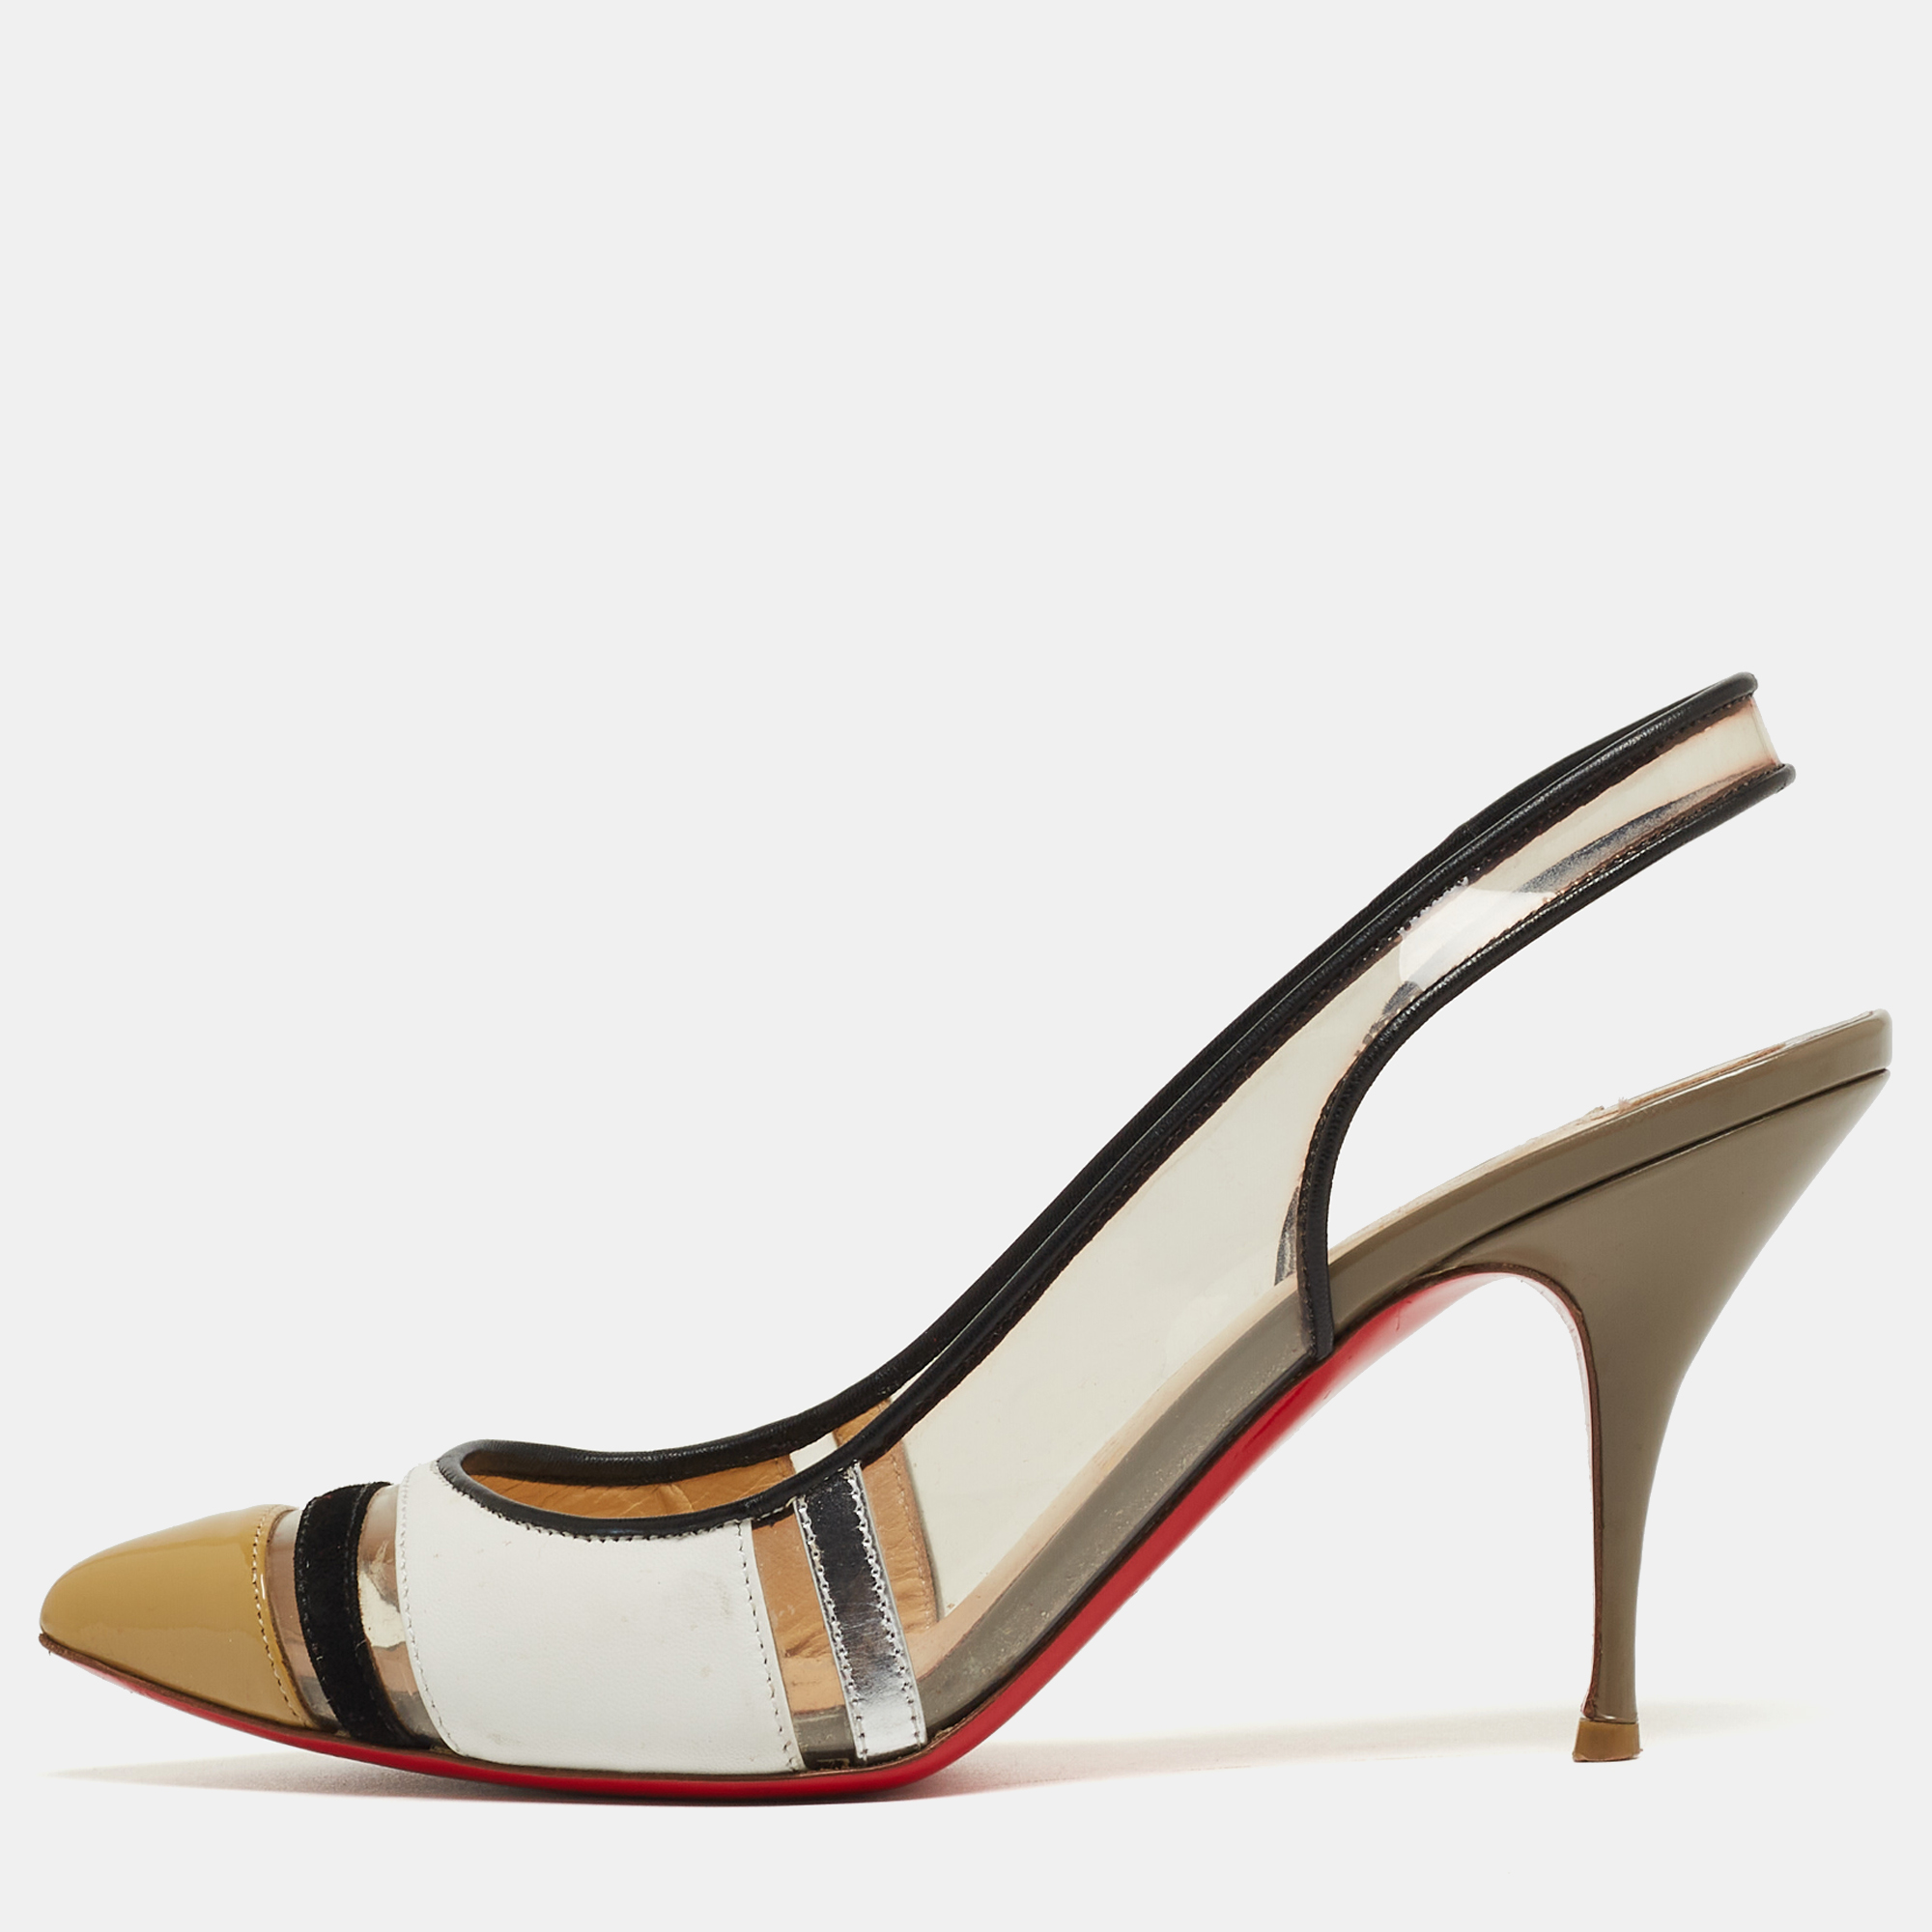 Christian louboutin tri-color pvc and leather highway slingback sandals size 36.5